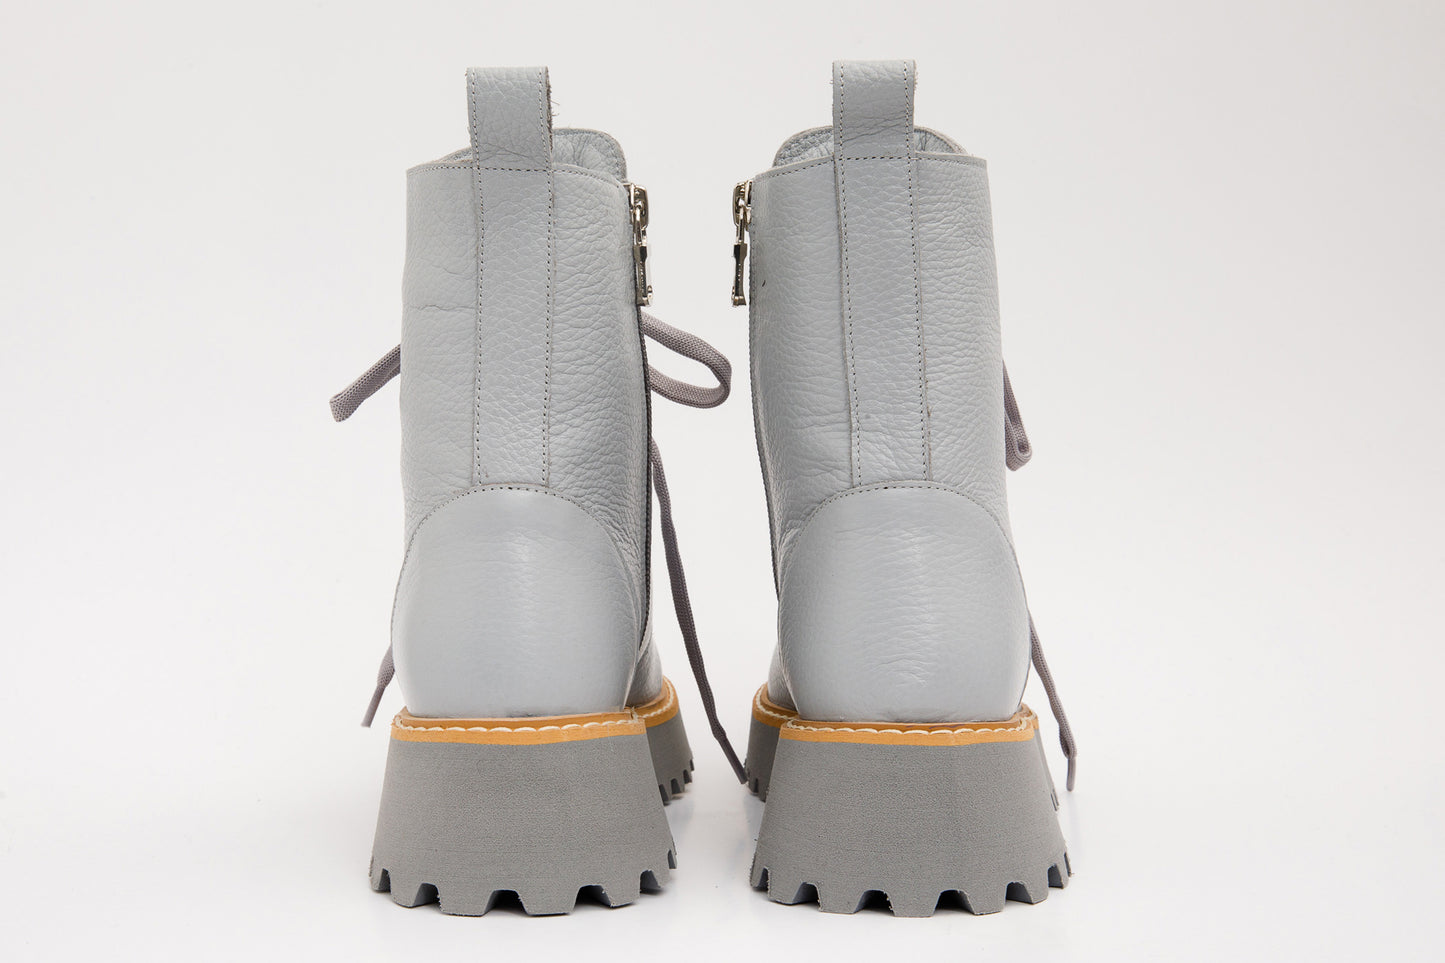 The Yildiz Grey Leather Lace-Up Ankle Women Boot With a Side Zipper